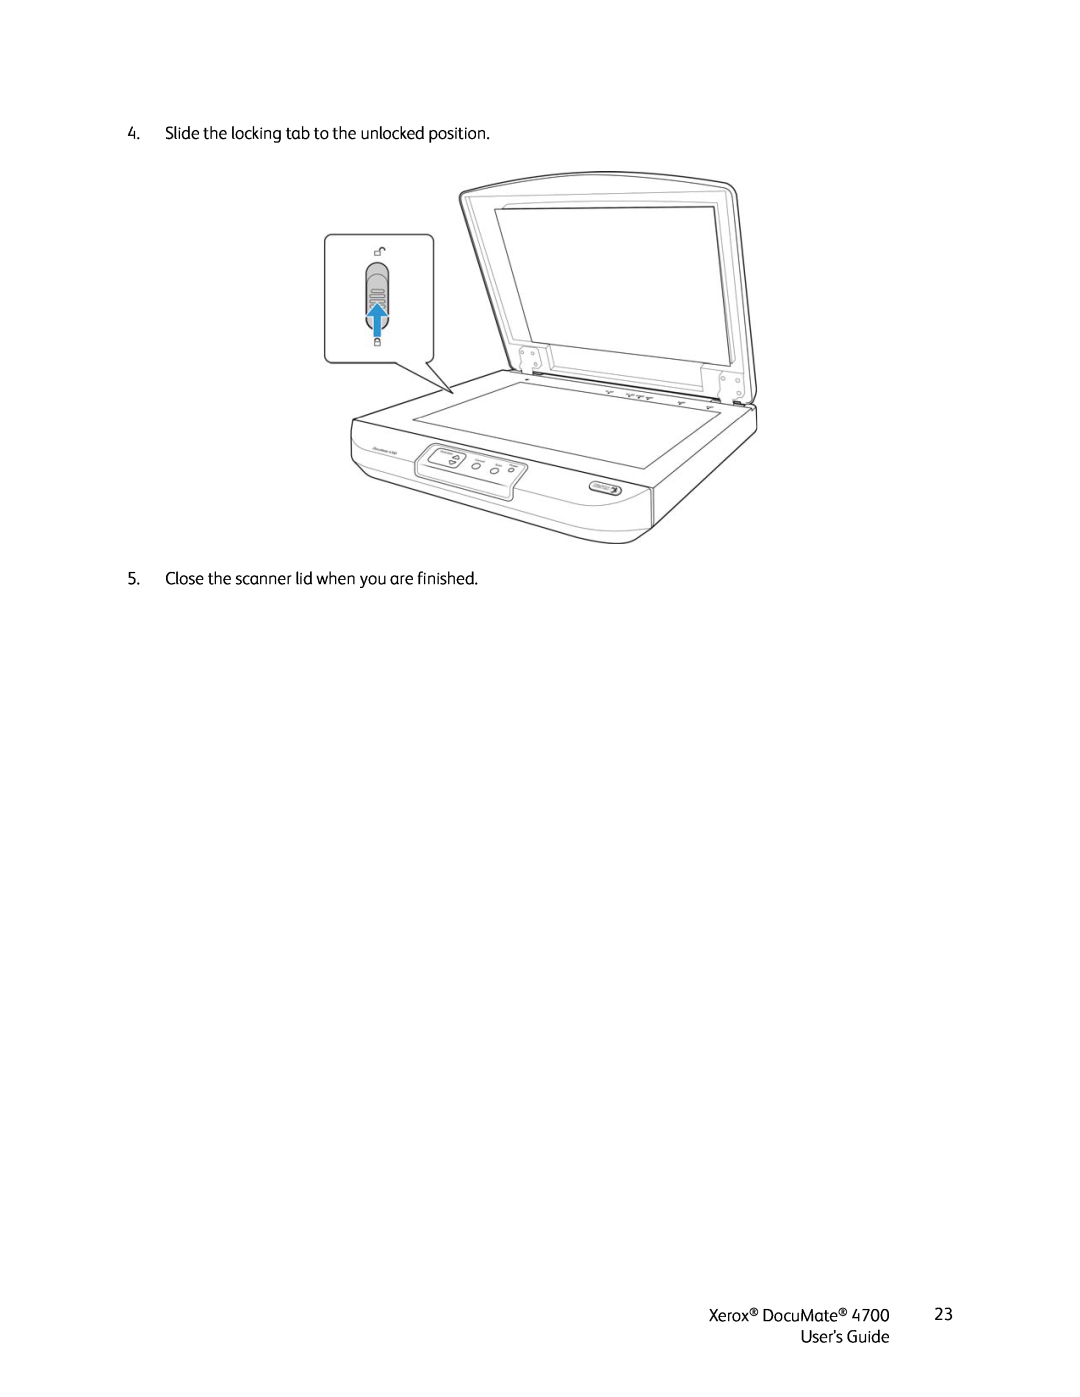 Xerox 4700 Slide the locking tab to the unlocked position, Close the scanner lid when you are finished, Xerox DocuMate 